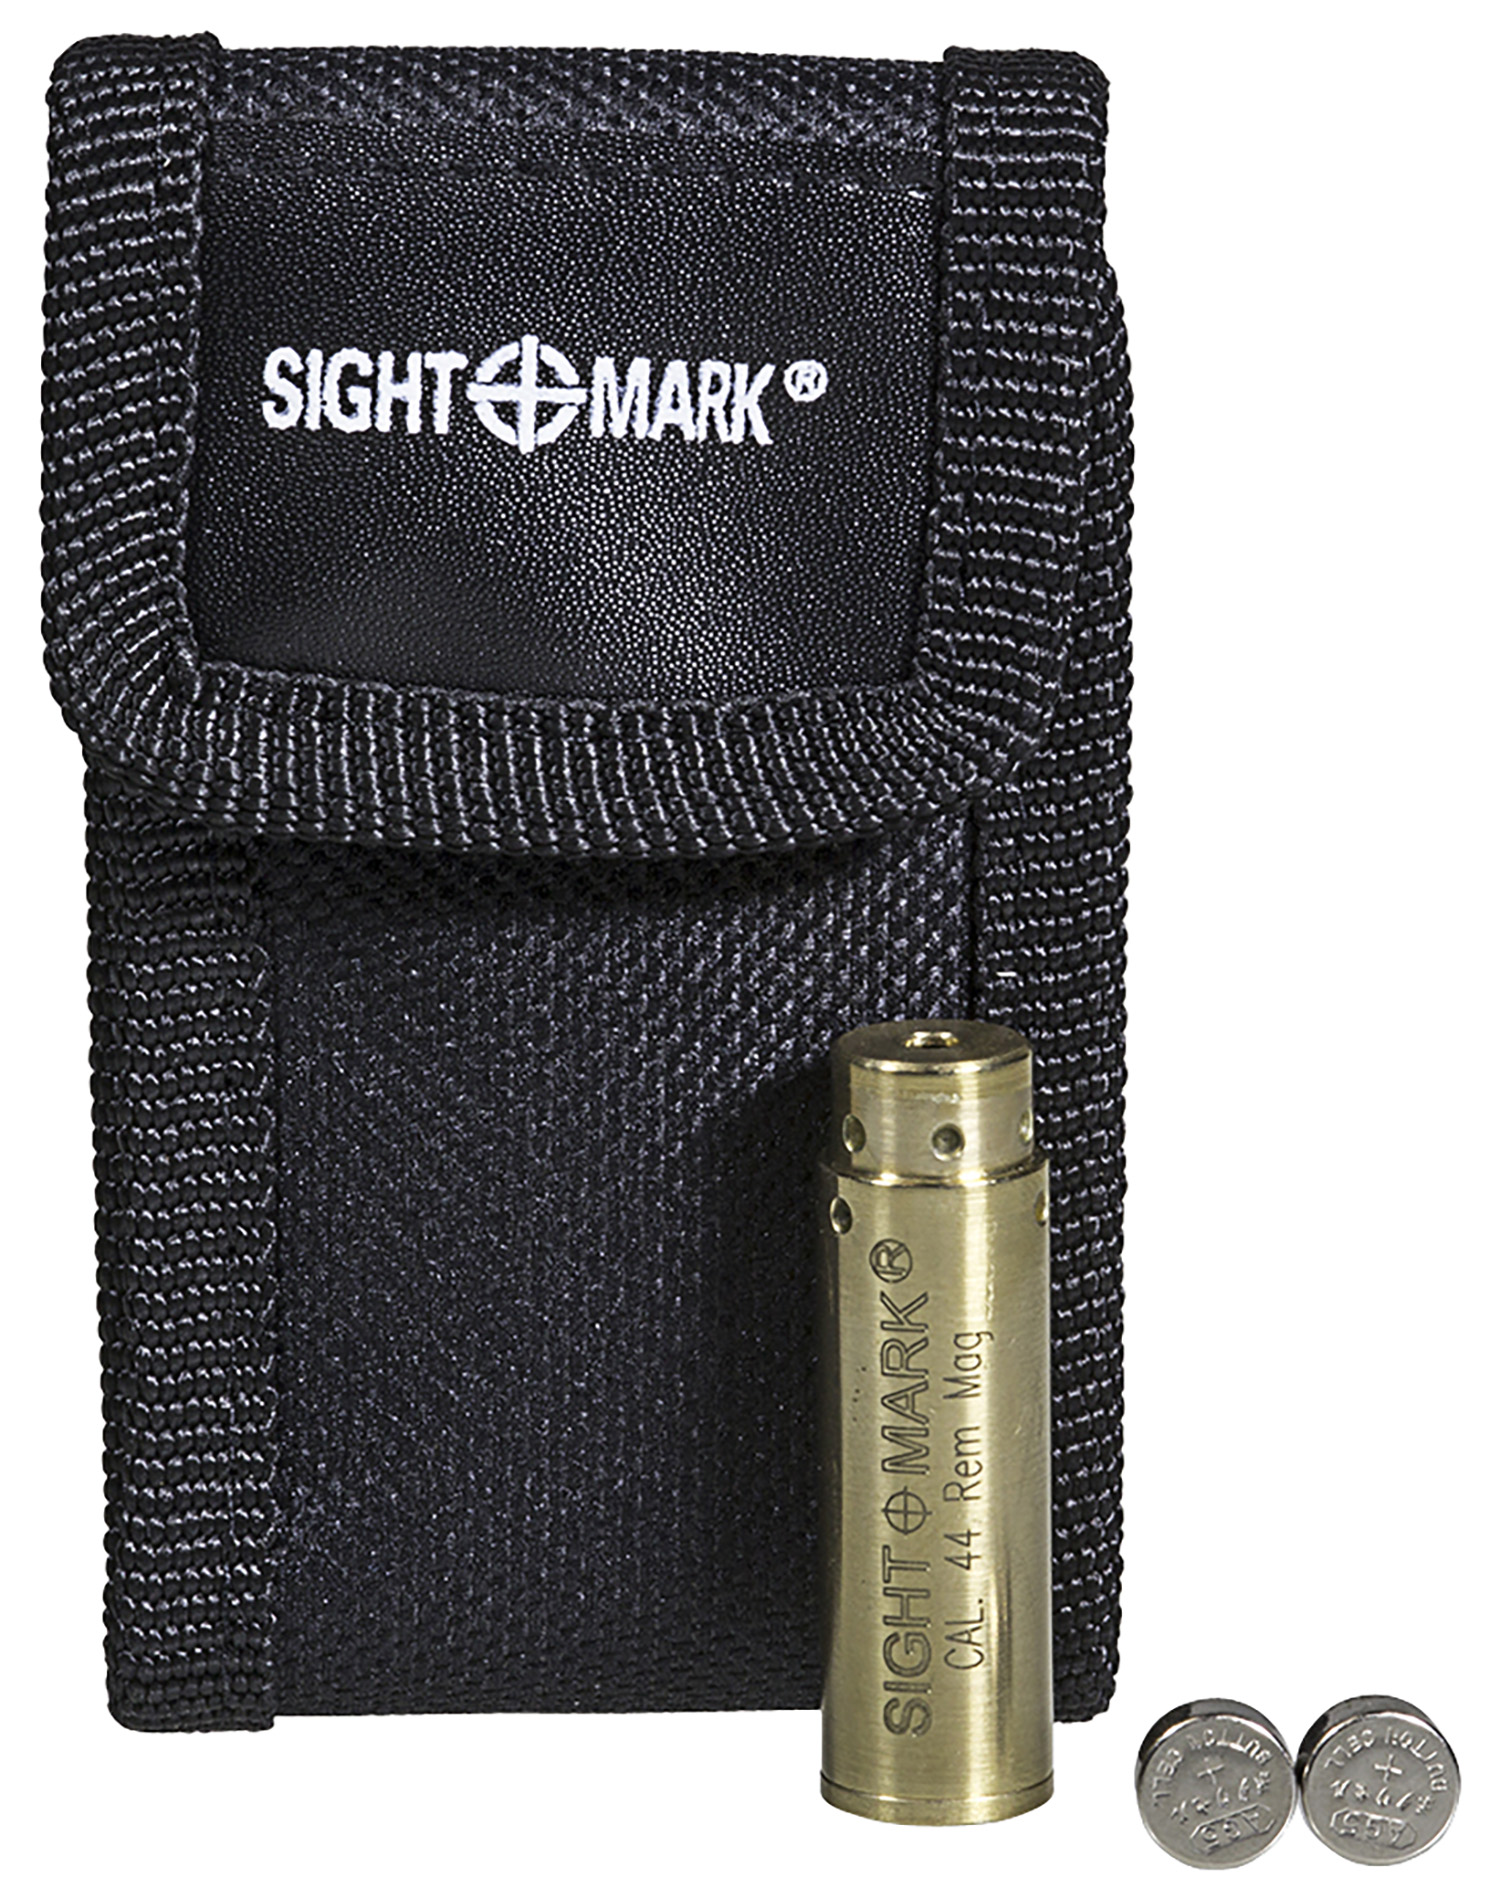 Sightmark SM39019 Boresight  Red Laser for 44 Mag Brass Includes Battery Pack & Carrying Case